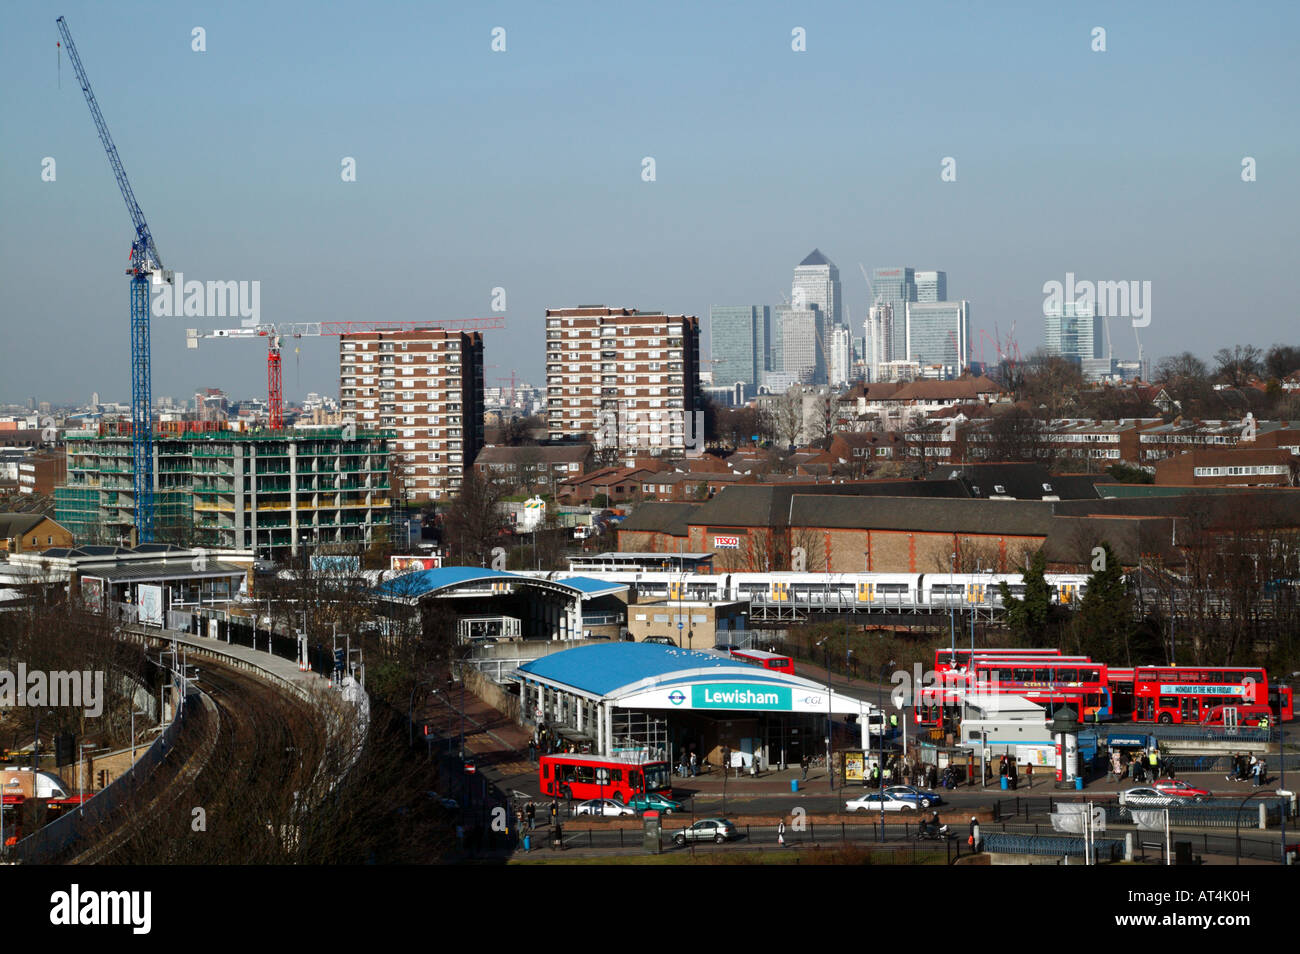 Lewisham Station with the Canary Wharf Business Area in the Background Stock Photo